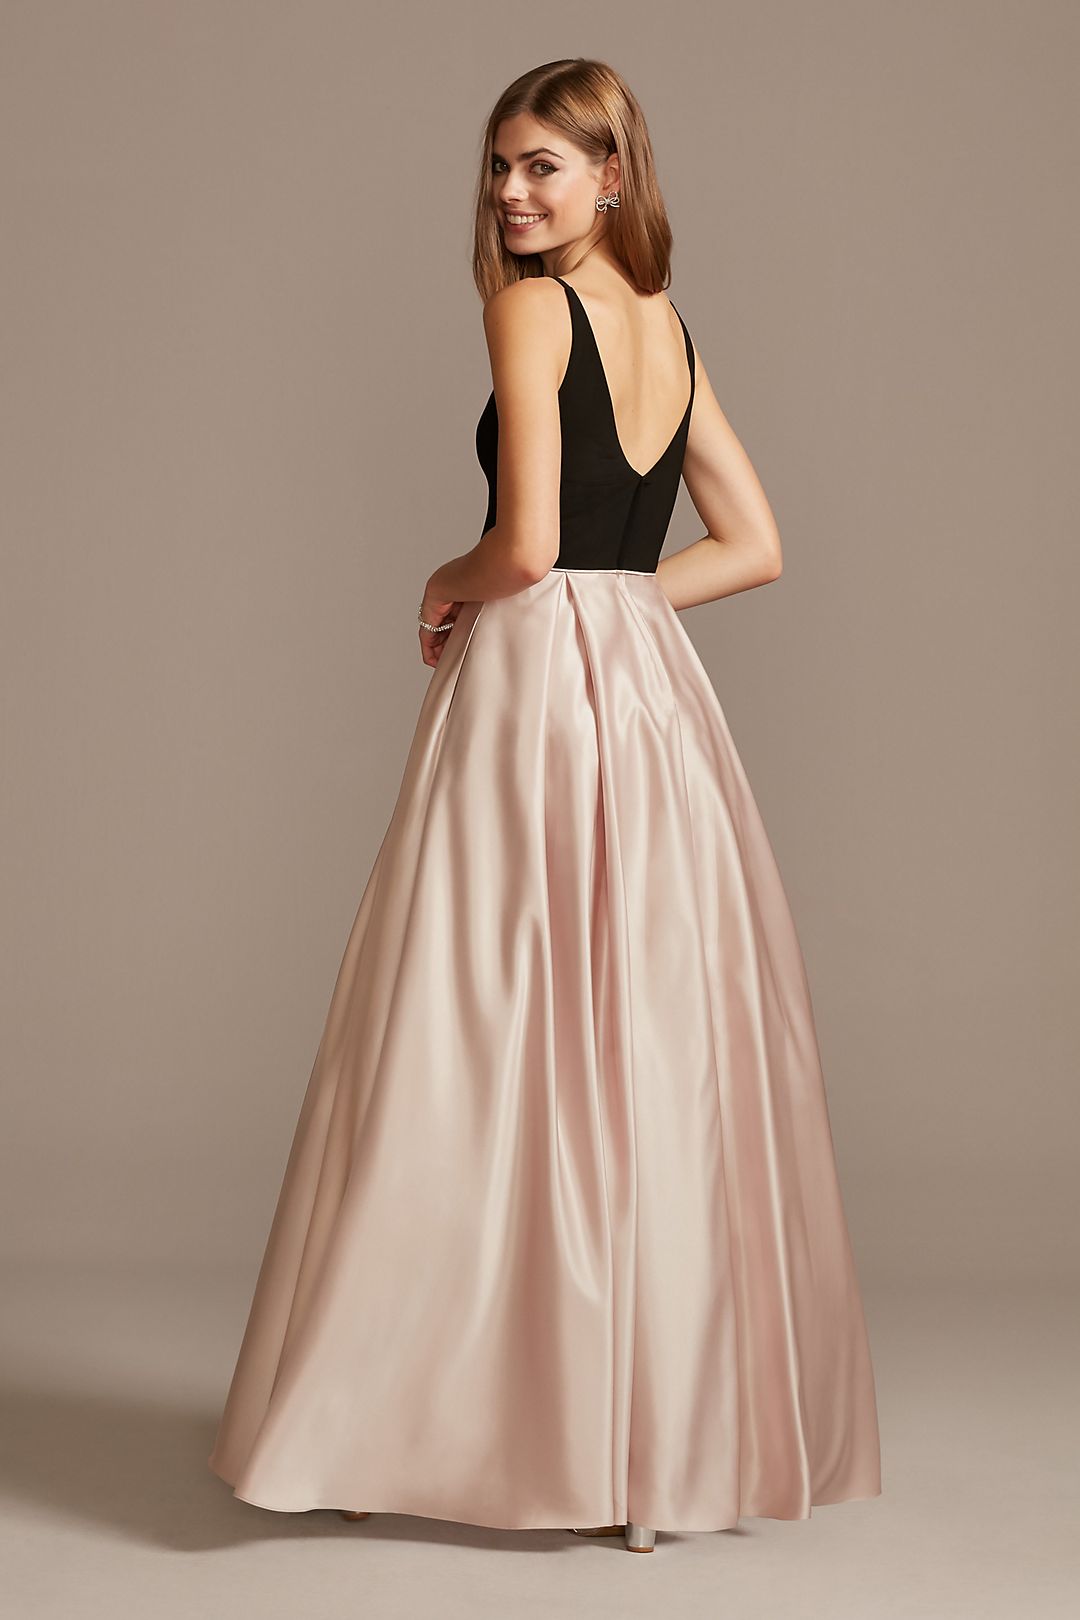 Satin Skirt Plunging-V Ball Gown with Pockets Image 4